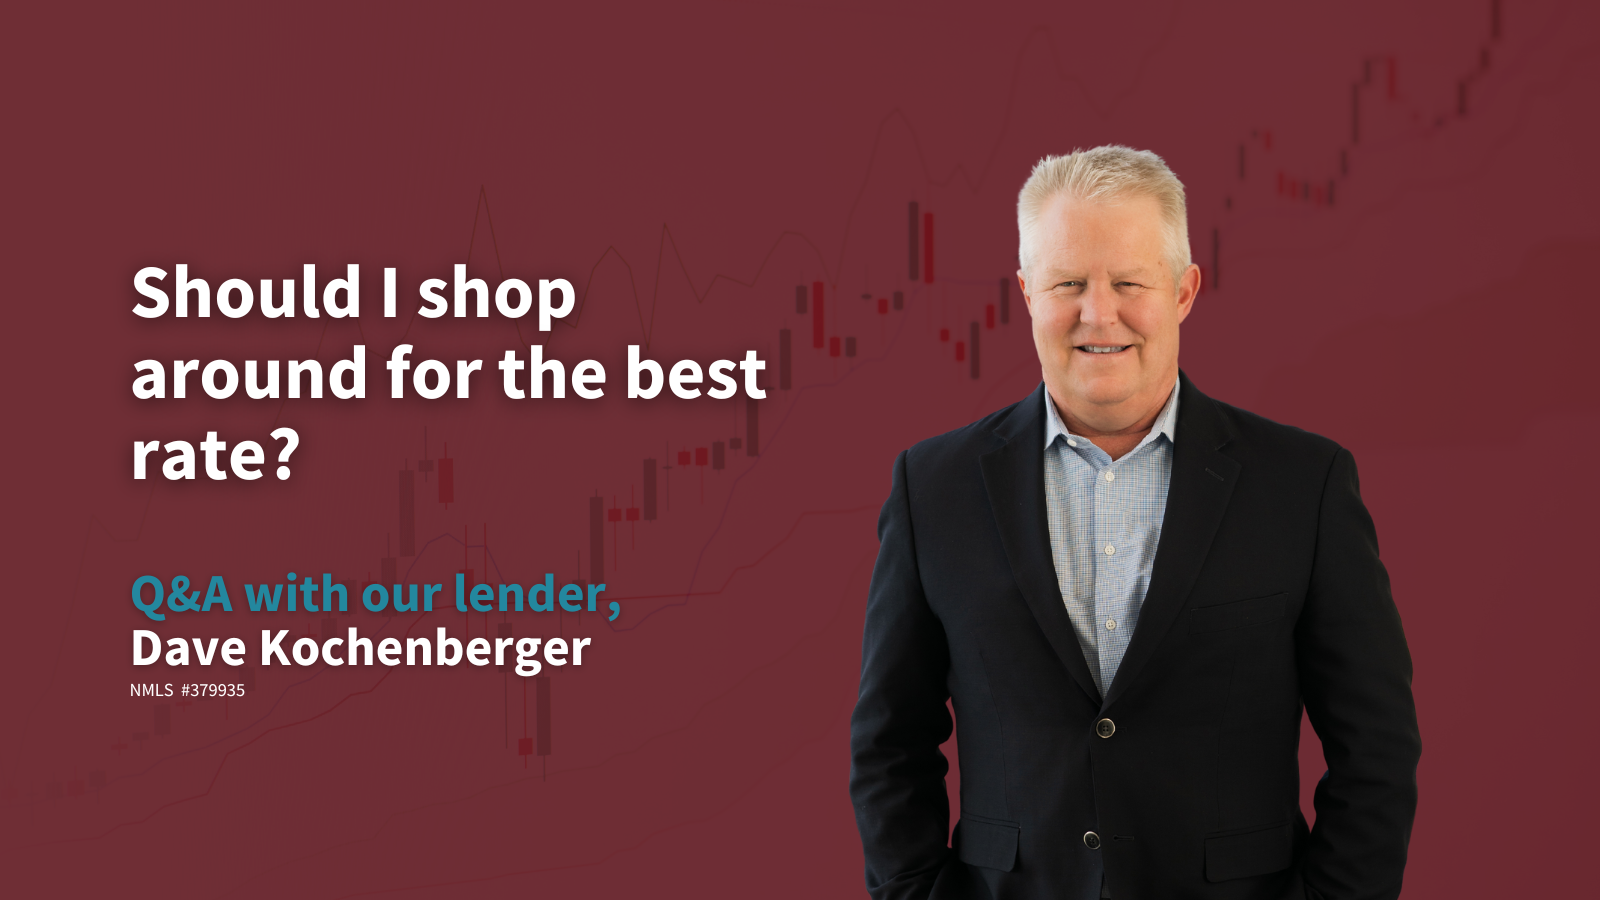 Should I shop around for the best rate? Q&A with Dave Kochenberger